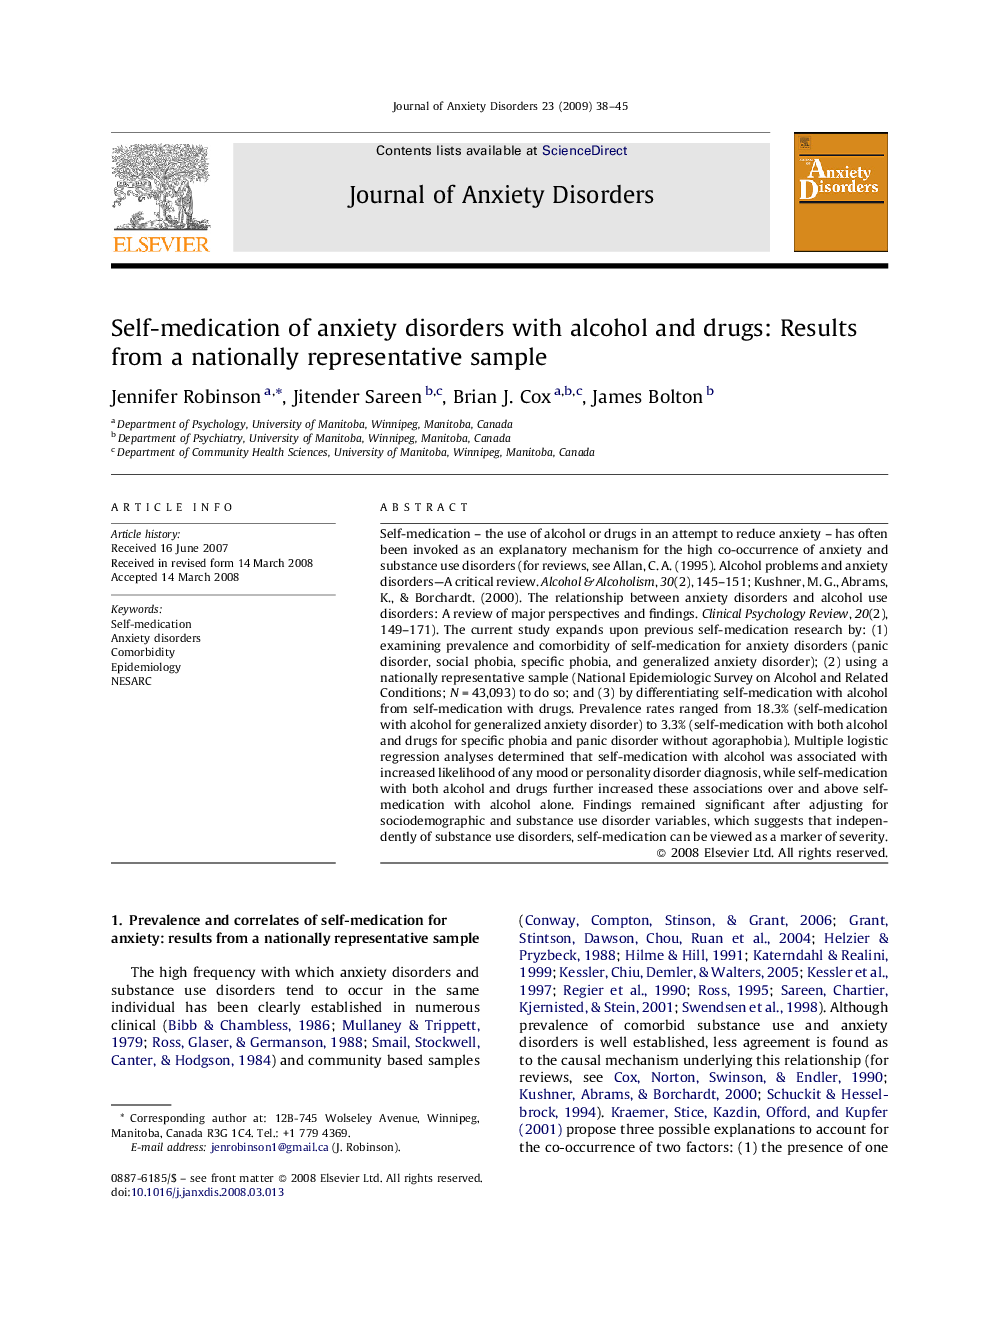 Self-medication of anxiety disorders with alcohol and drugs: Results from a nationally representative sample